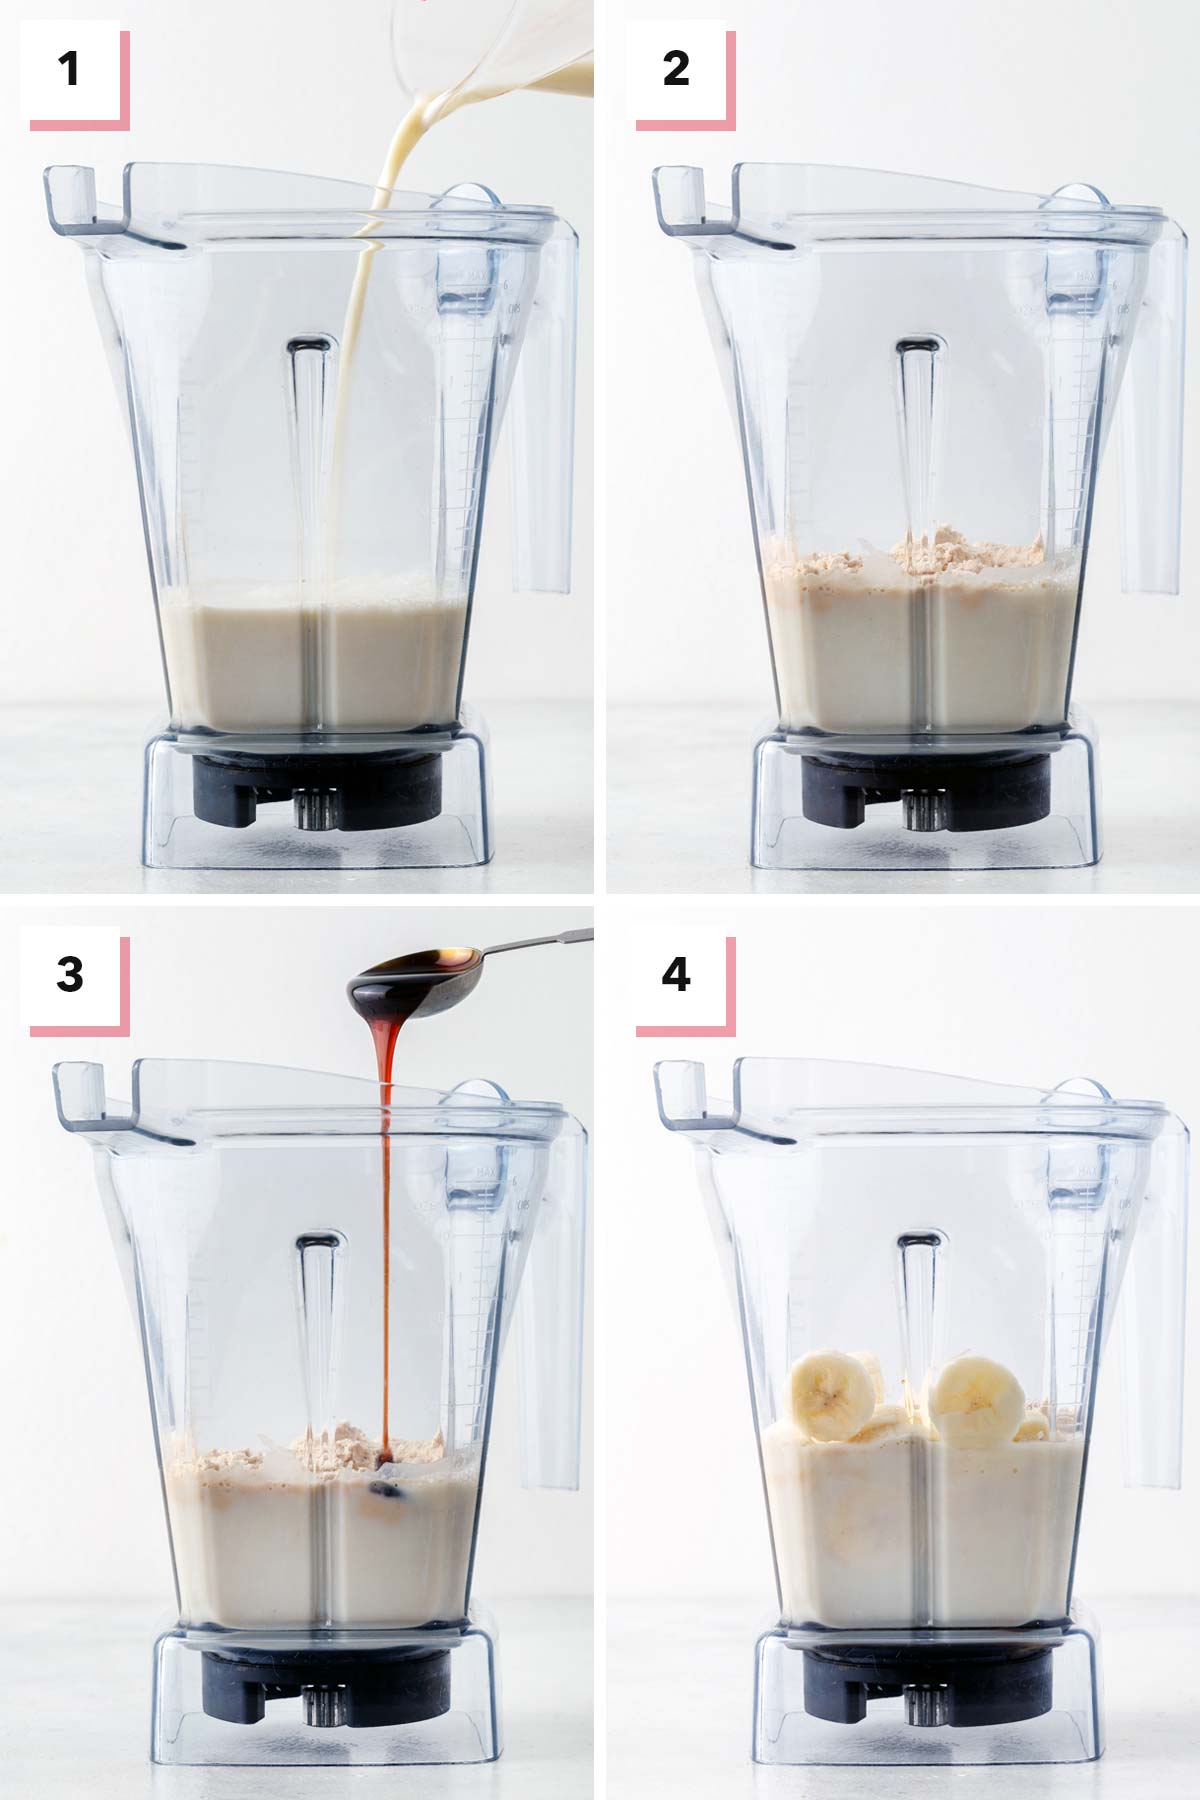 Steps for making a banana protein shake.